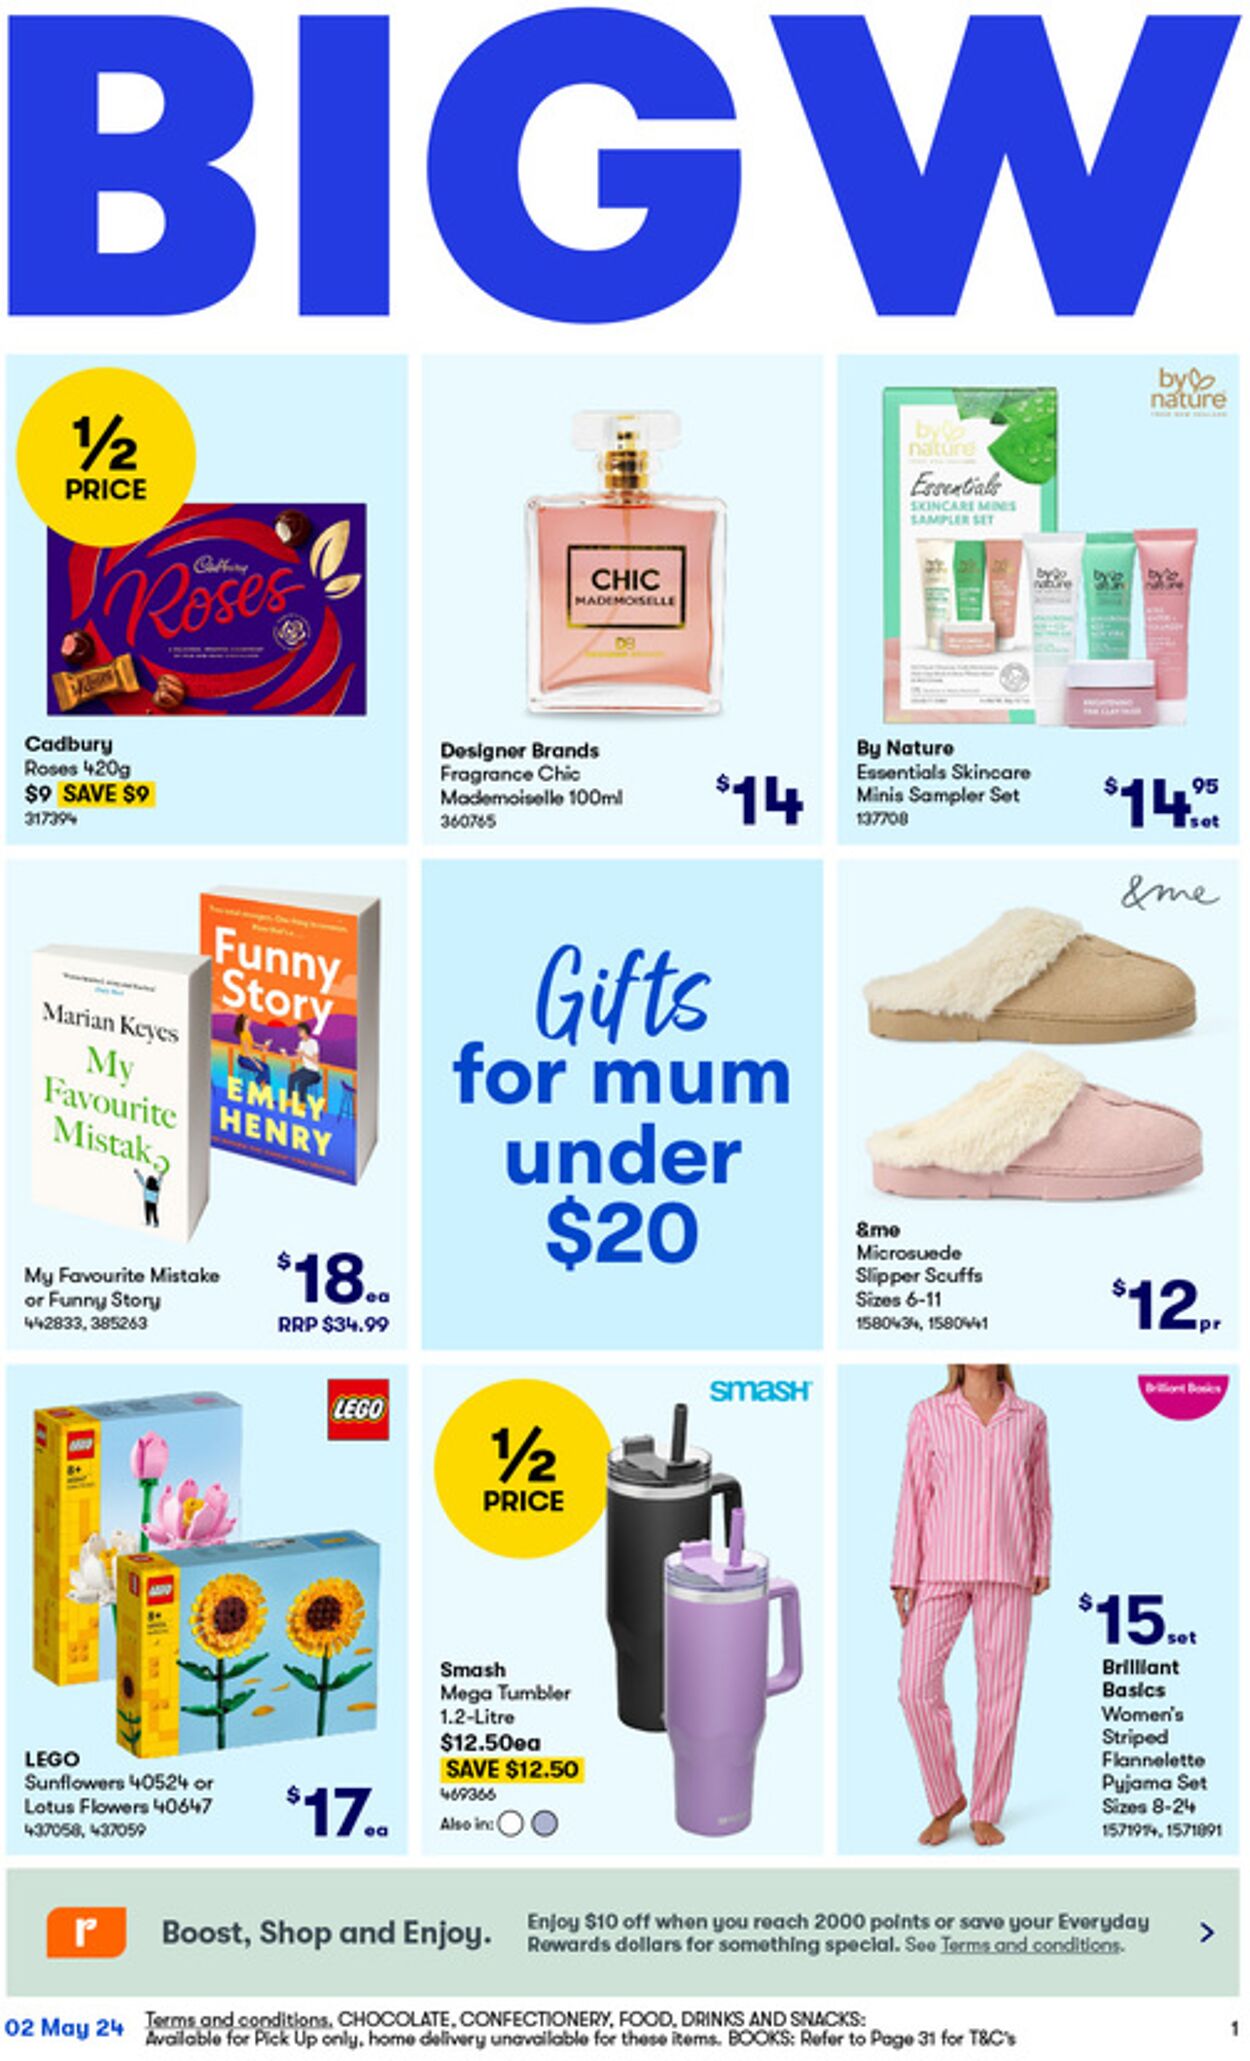 Big W Promotional catalogues